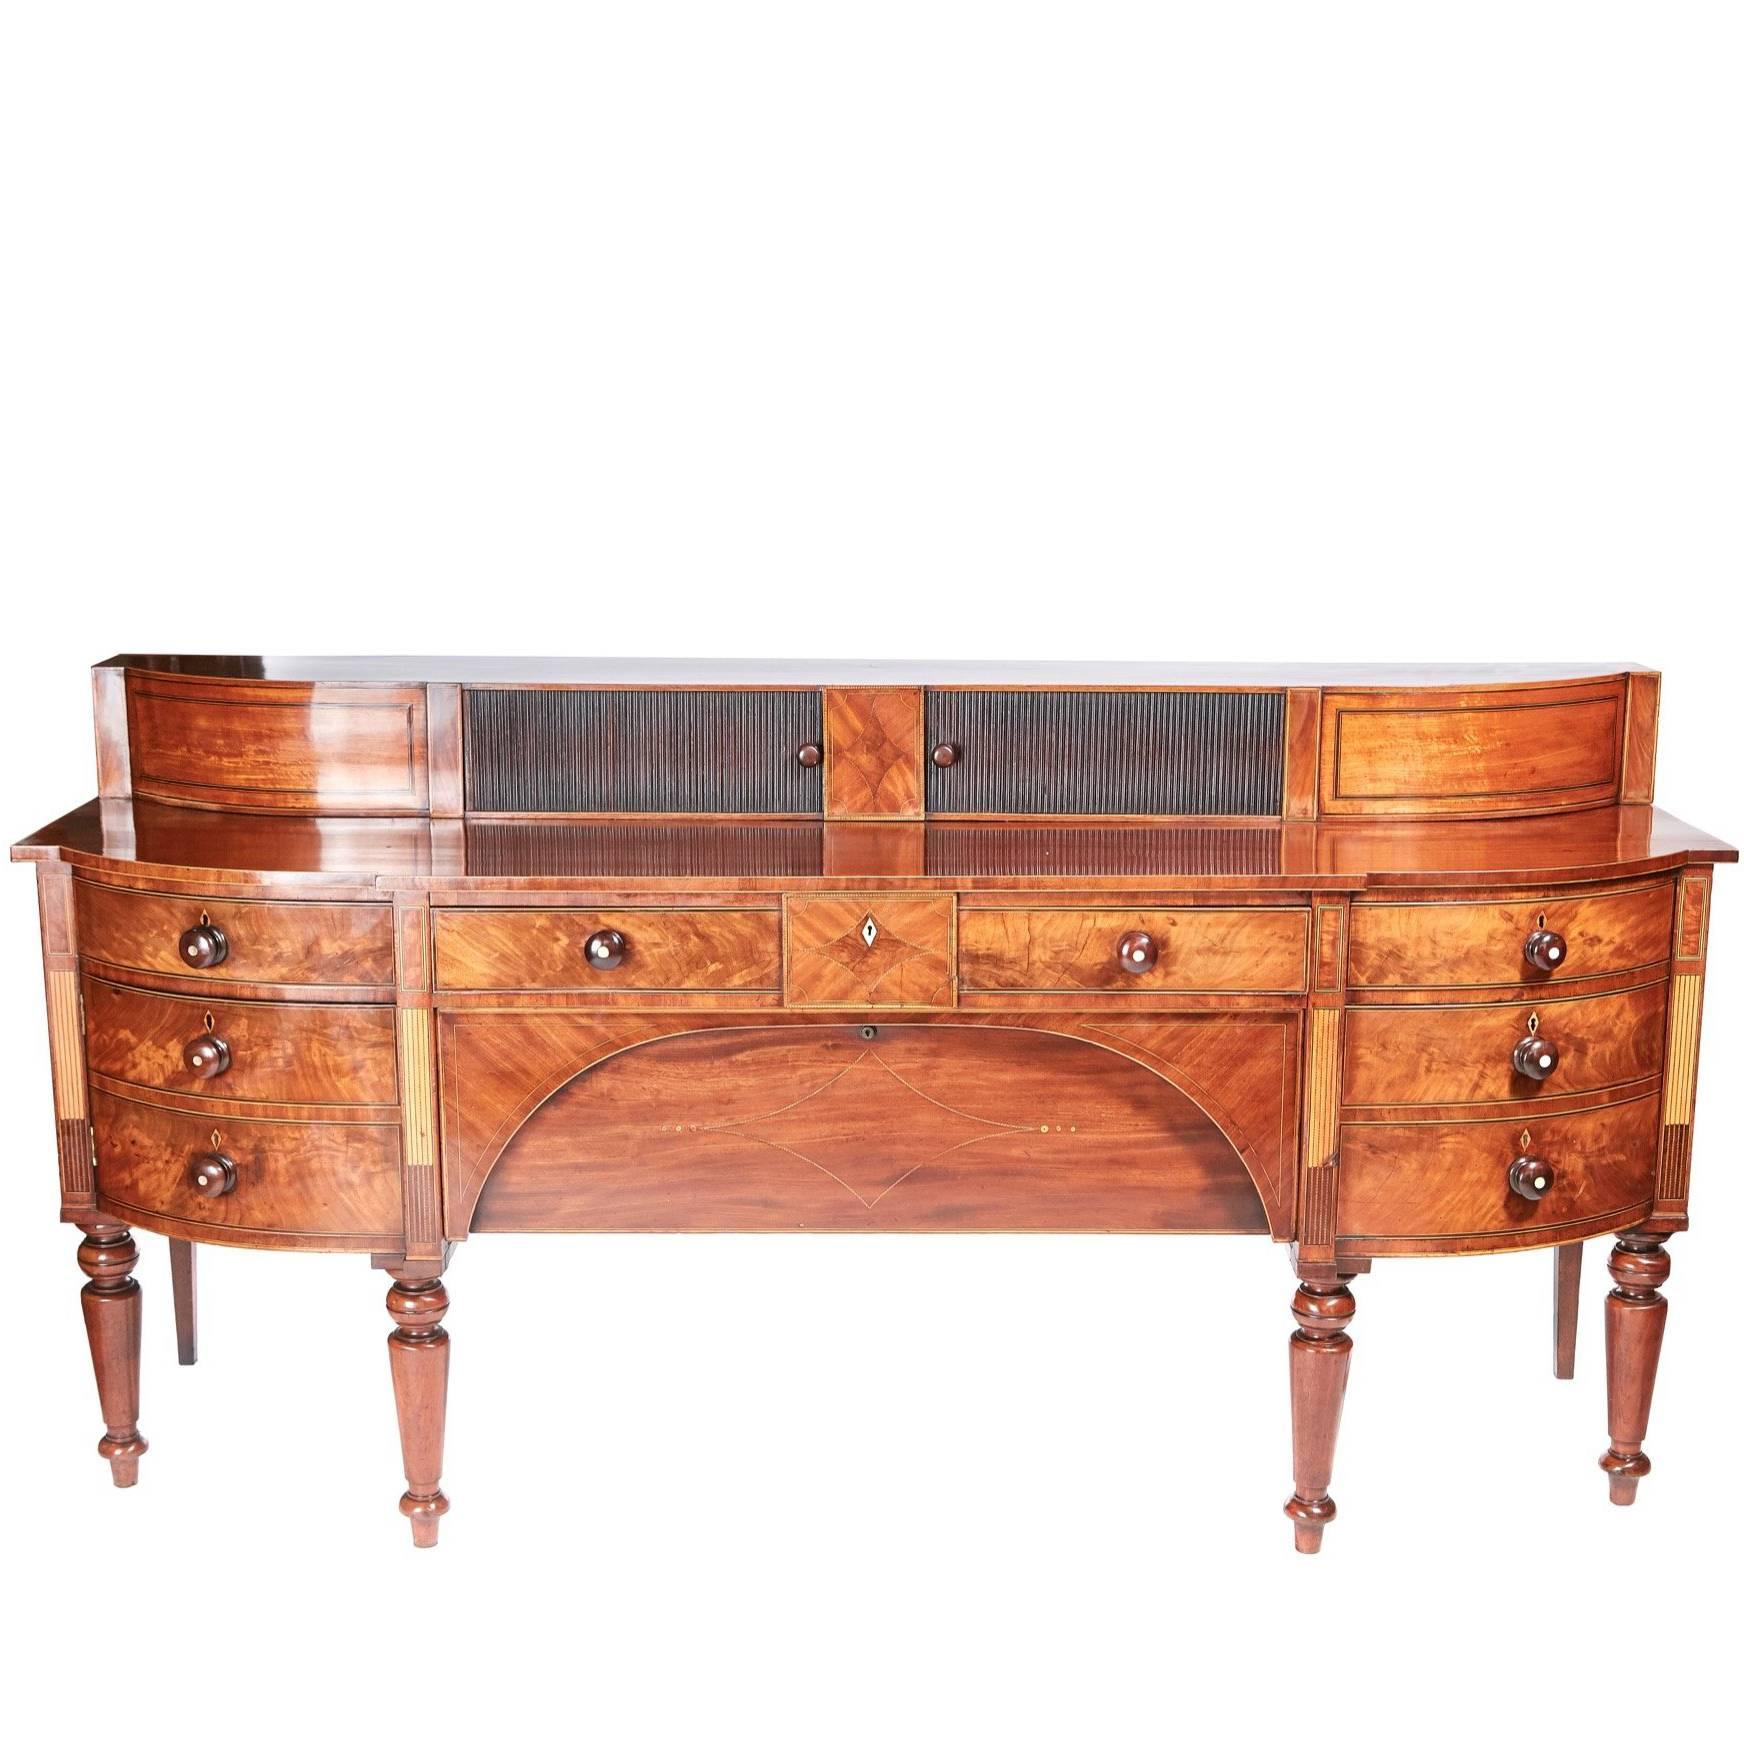 Large Outstanding Quality Georgian Inlaid Mahogany Sideboard